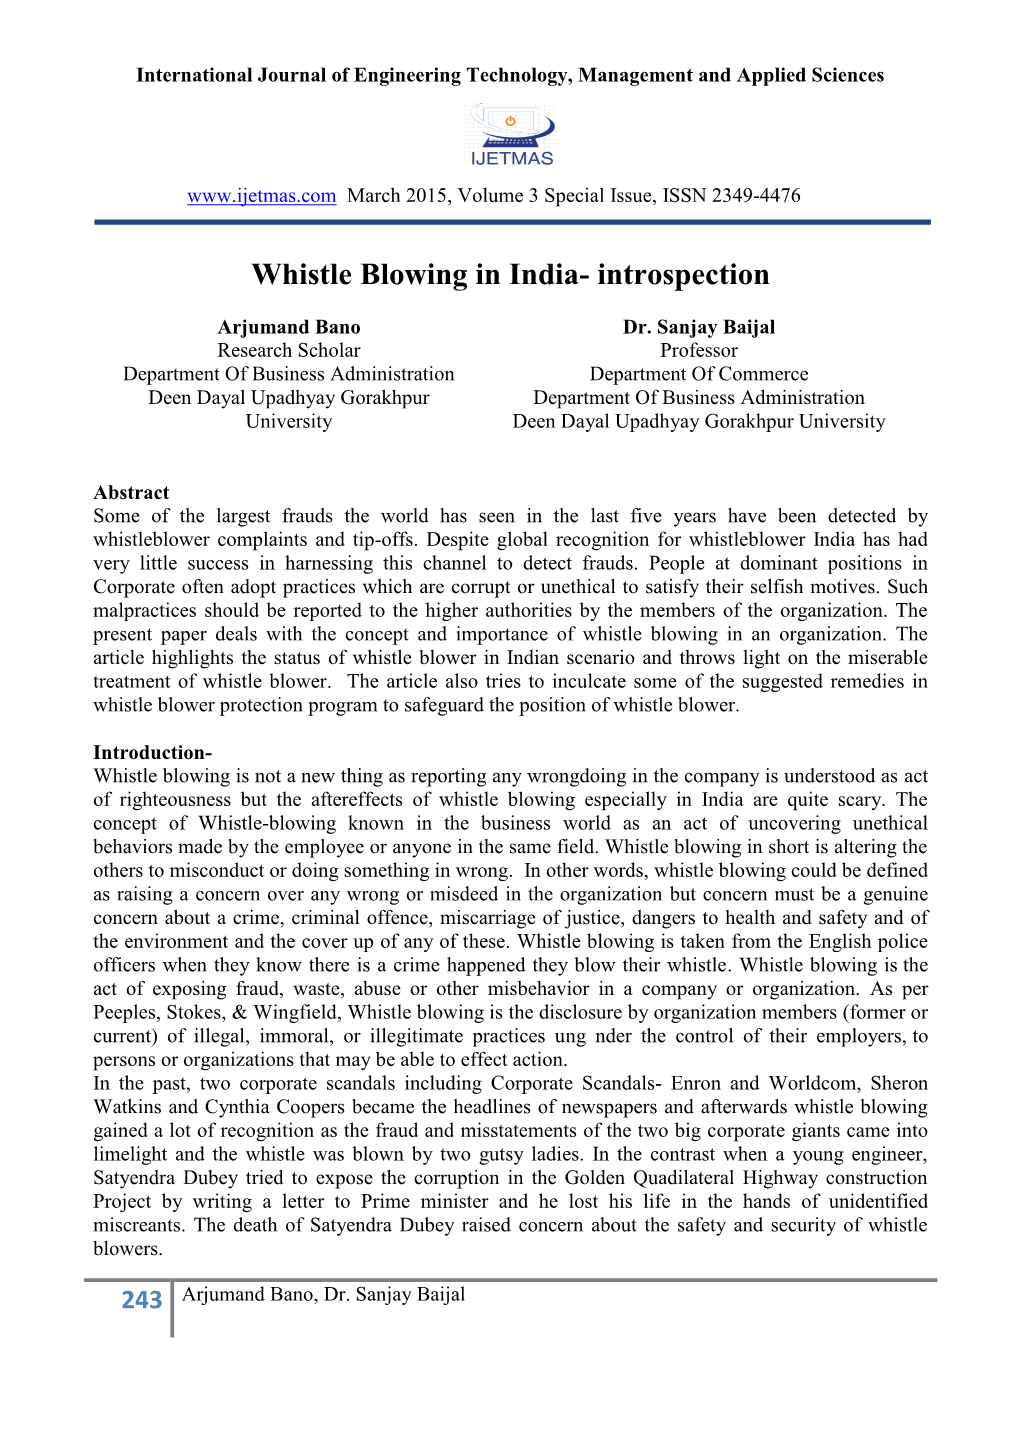 Whistle Blowing in India- Introspection